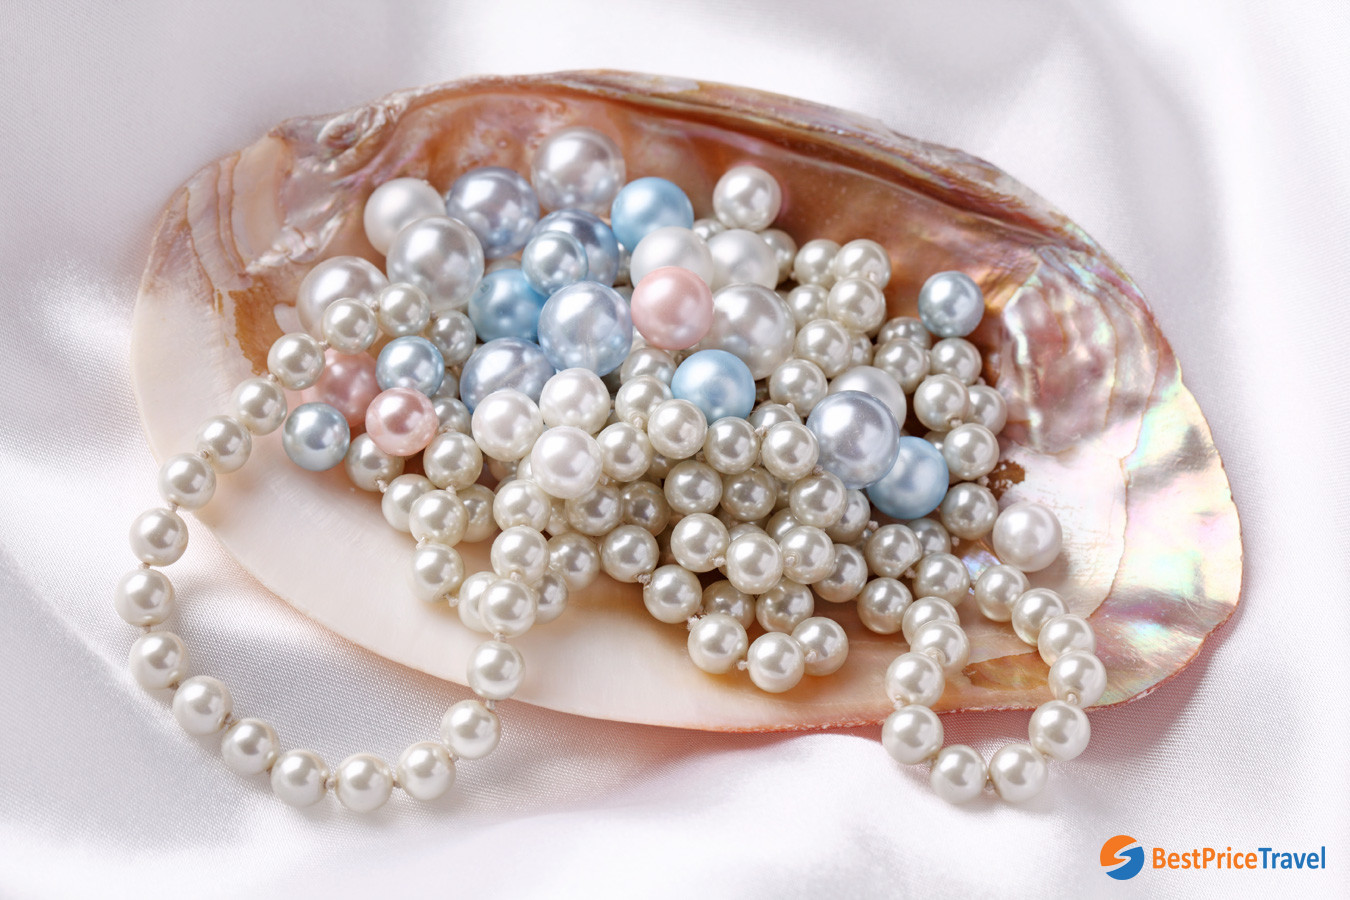 Halong Pearl - things must buy in Halong